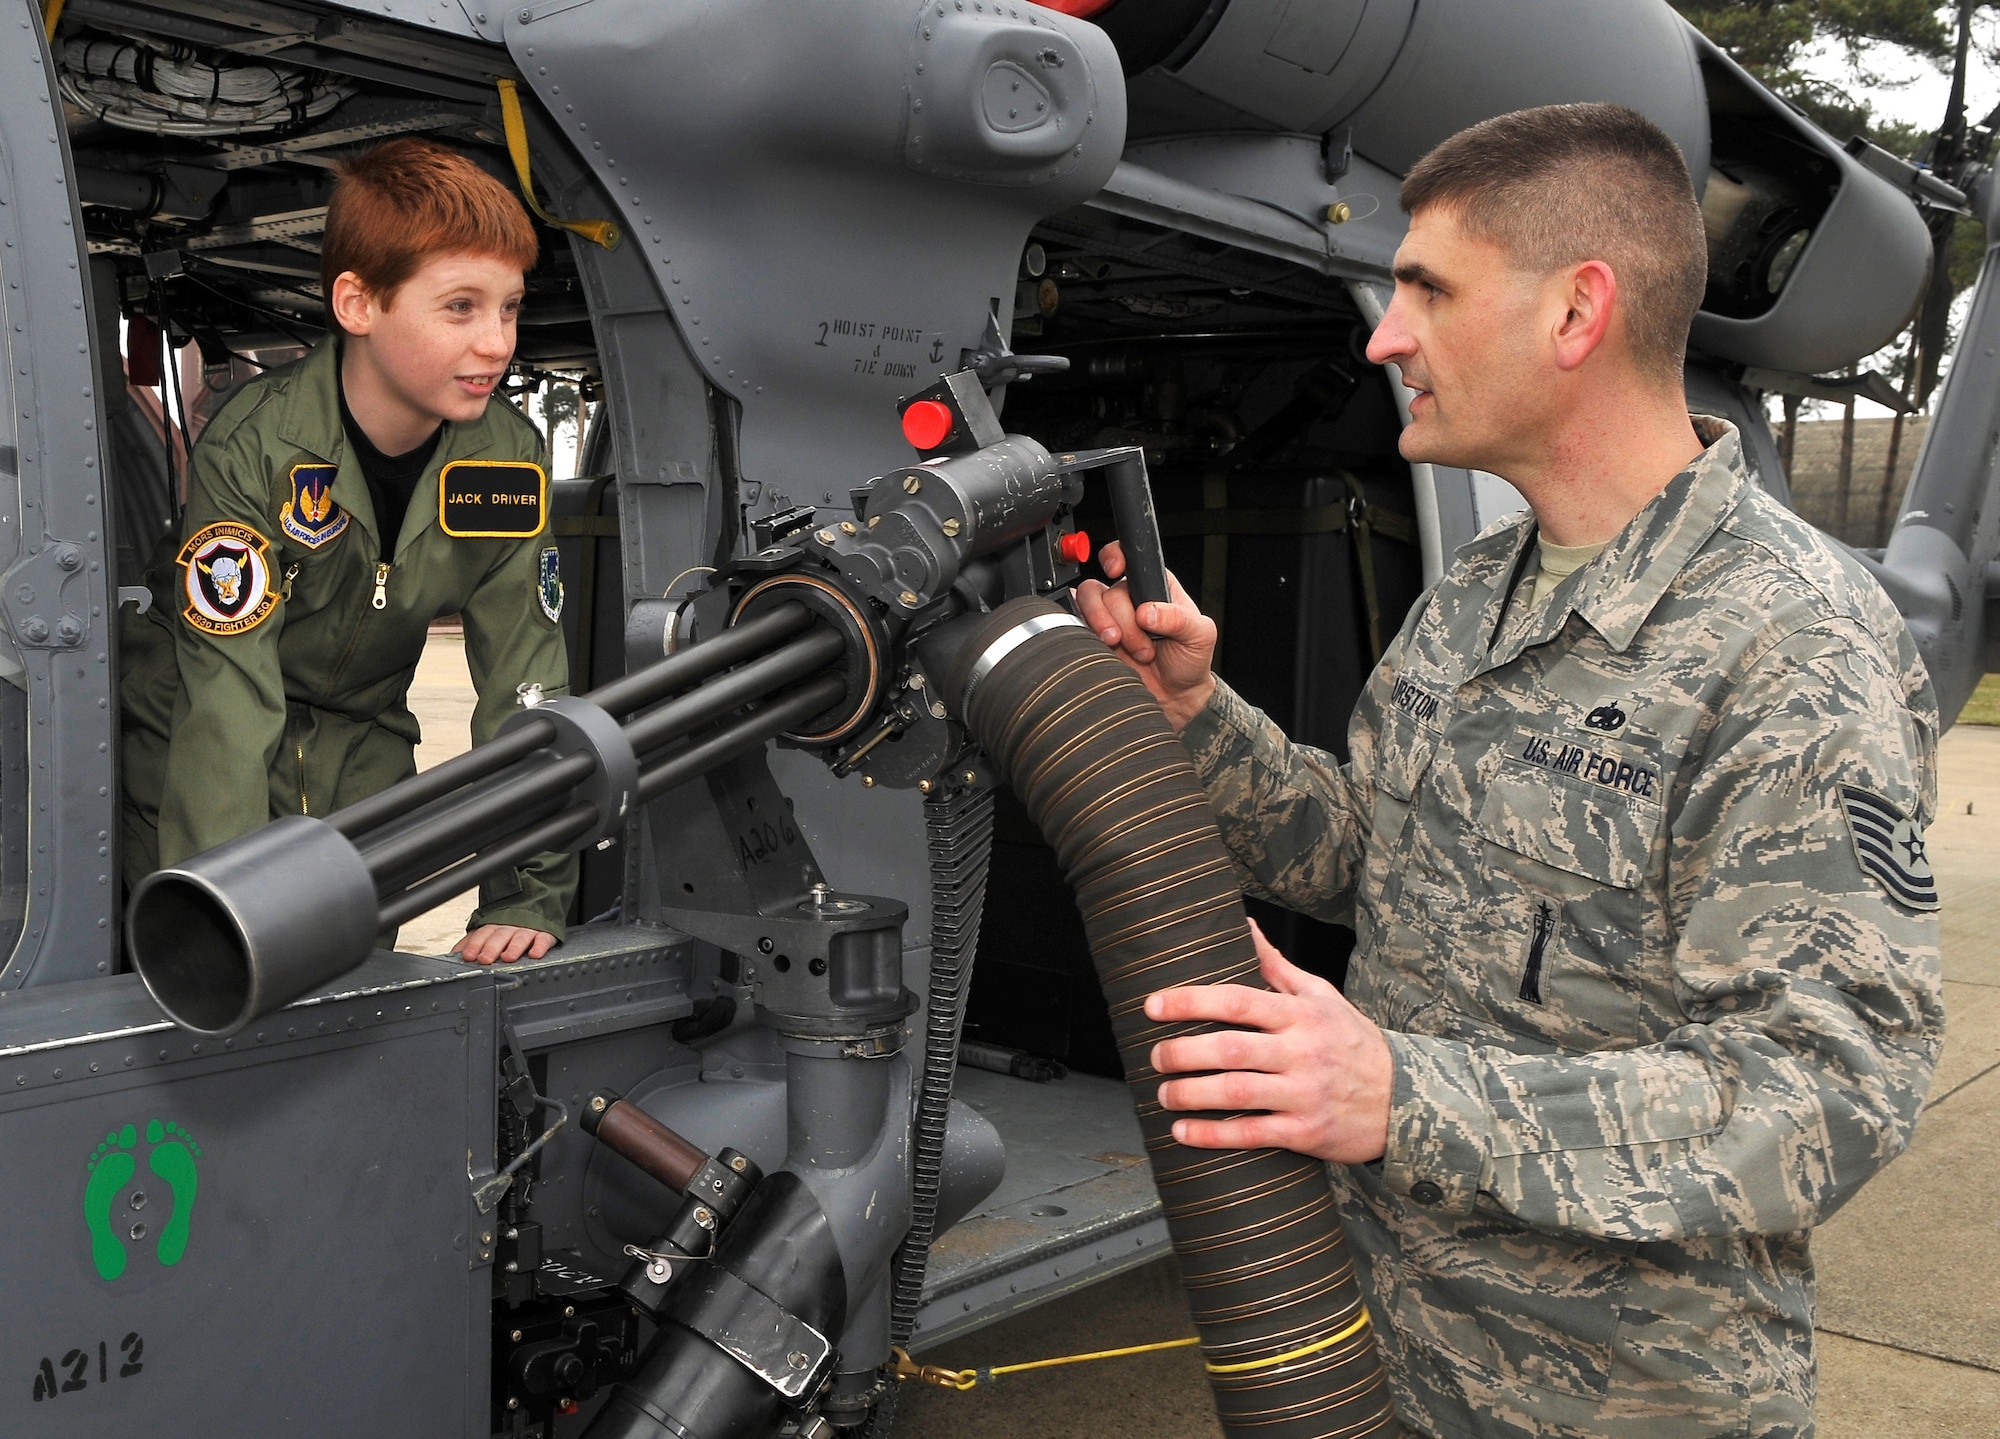 ROYAL AIR FORCE LAKENHEATH, England -- Jack Driver, 10, learns how to operate a GAU-2C mini-gun from Tech. Sgt. Dietrich Thurston, 748th Aircraft Maintenance Squadron weapons expeditor, inside an HH-60 Pave Hawk helicopter on the RAF Lakenheath flightline March 14, 2012.  Driver, who suffers from Aplastic Anemia, a rare auto immune disorder where bone marrow fails to make enough blood cells, was selected as a pilot for the day.  The Pilot for a Day program is new to RAF Lakenheath and provides children in the local community, who are fighting life-threatening illnesses or conditions, a day of fun as well as a break from the routine doctor and hospital visits. (U.S. Air Force photo by Staff Sgt. Connor Estes)